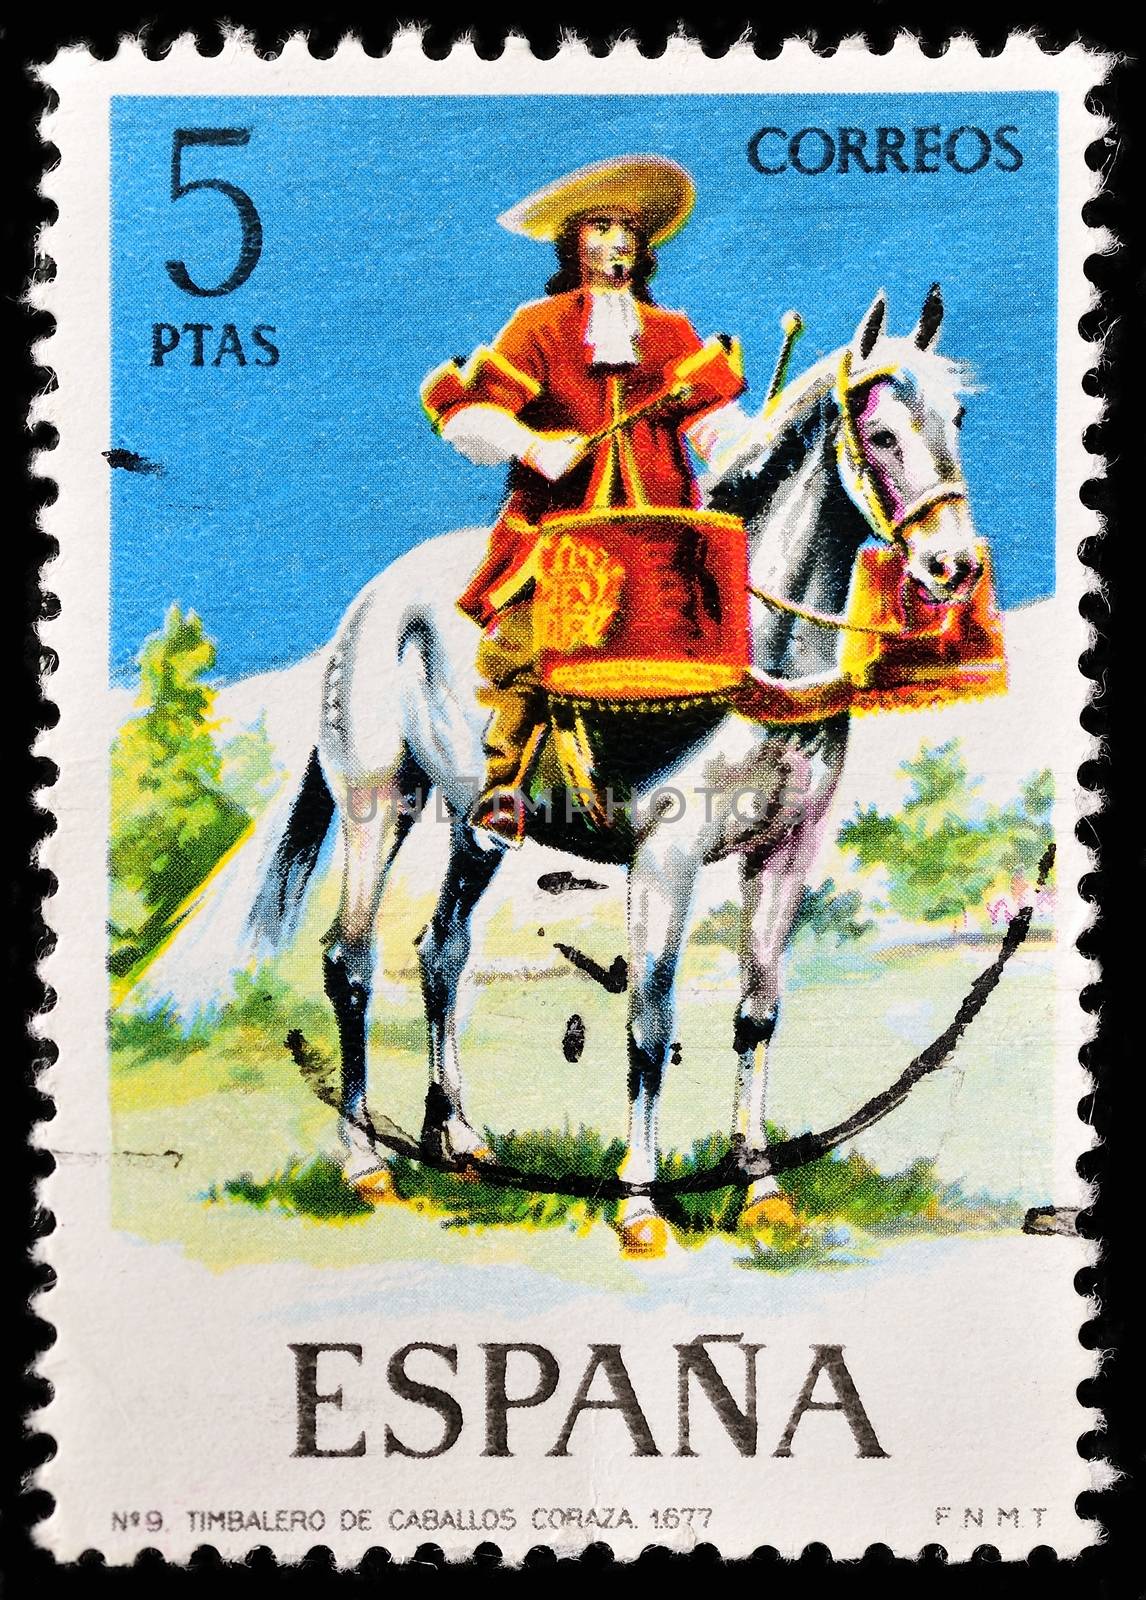 SPAIN - CIRCA 1974: a stamp printed in the Spain shows Mounted Drummer of the Dragoons, 1677, Uniform, circa 1974